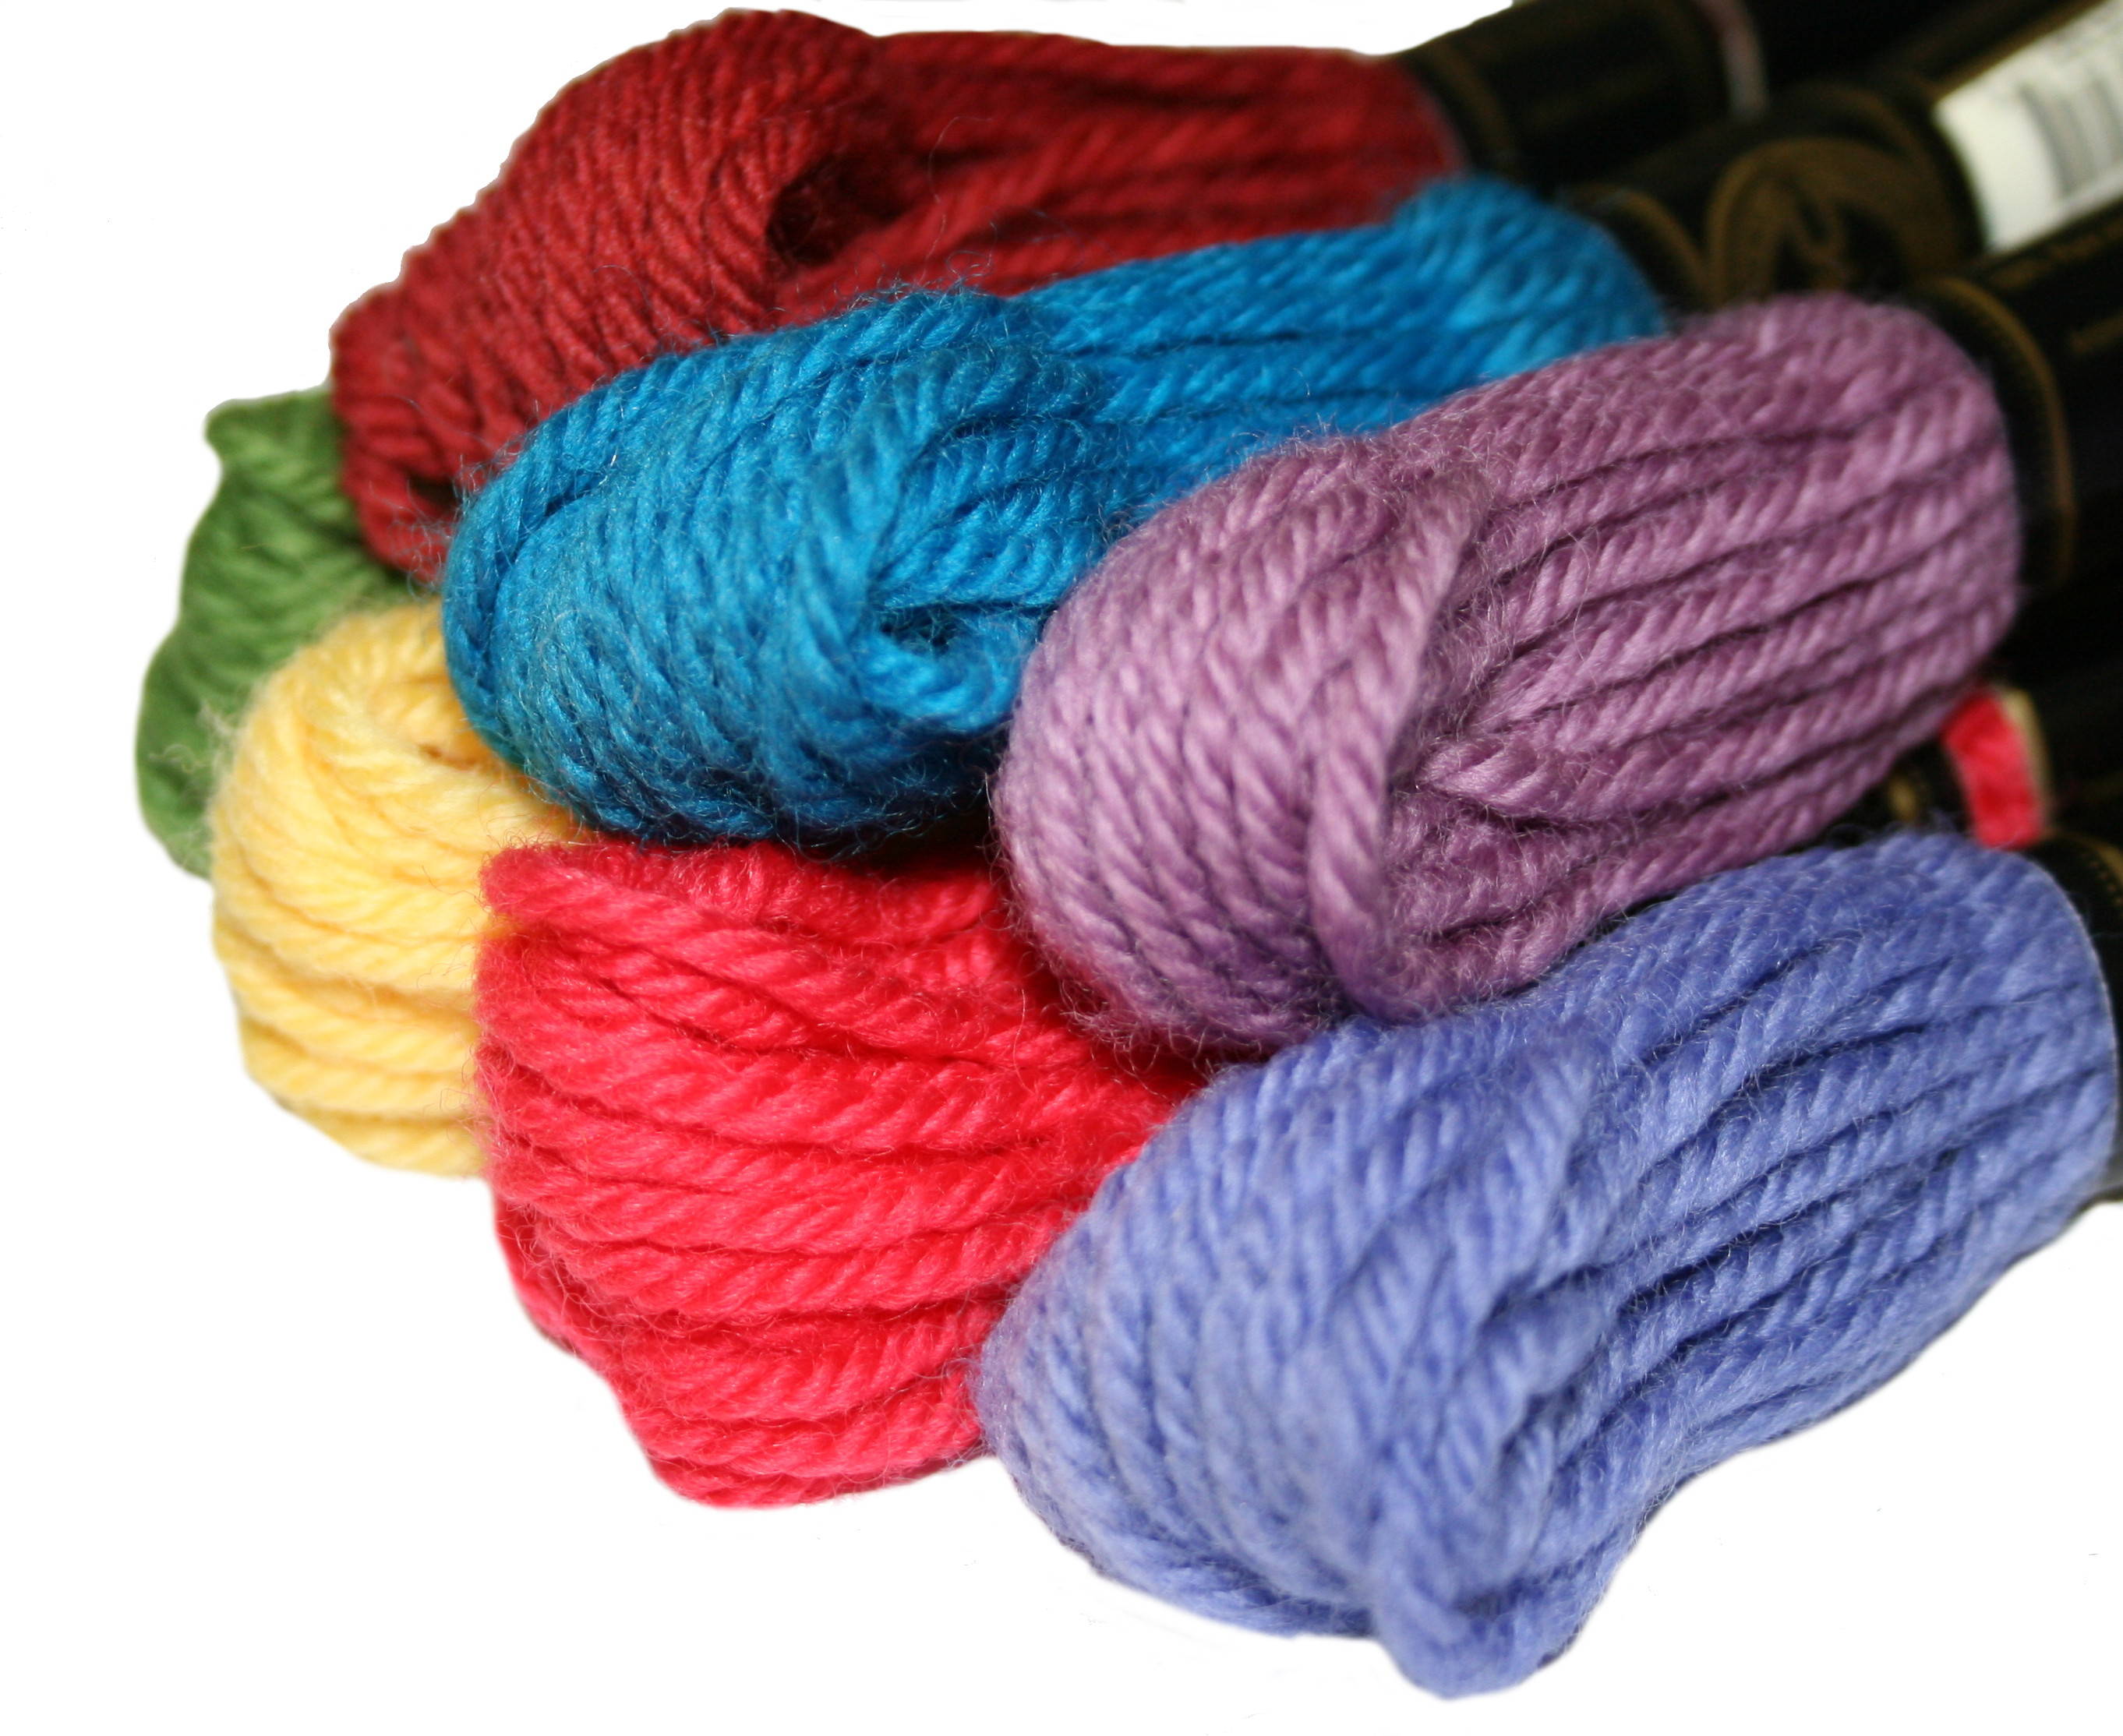 Colorful yarns - tapestry wool